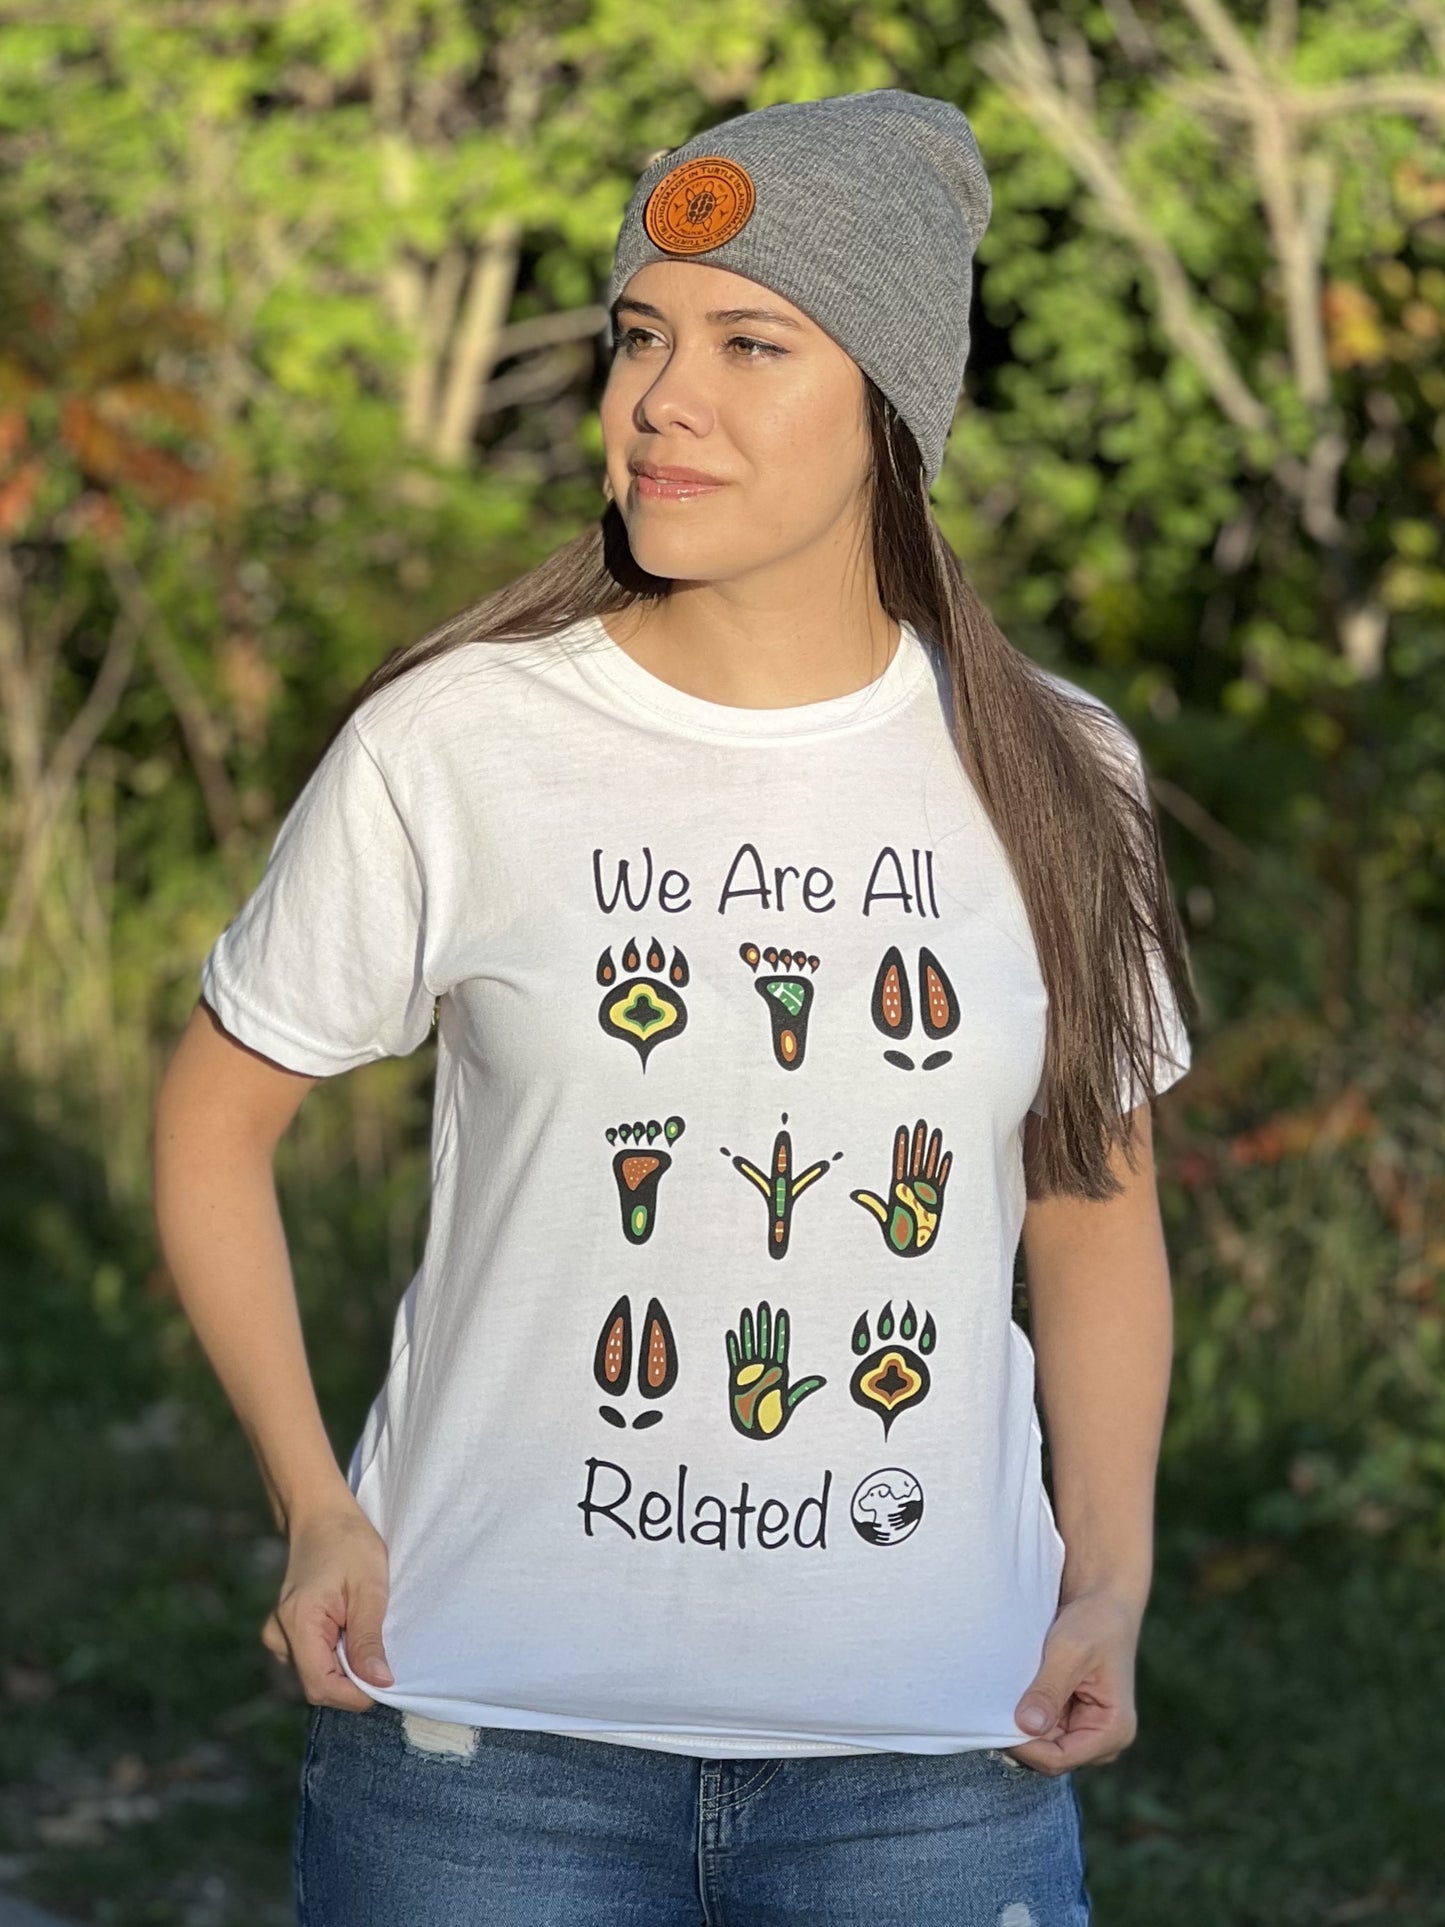 A woman wearing a white t-shirt with a mutlti-coloured print of stylized animal and human footprints. The words "We are all" are above the footprints "Related" is below the footprints with the One Health Partners logo beside. 